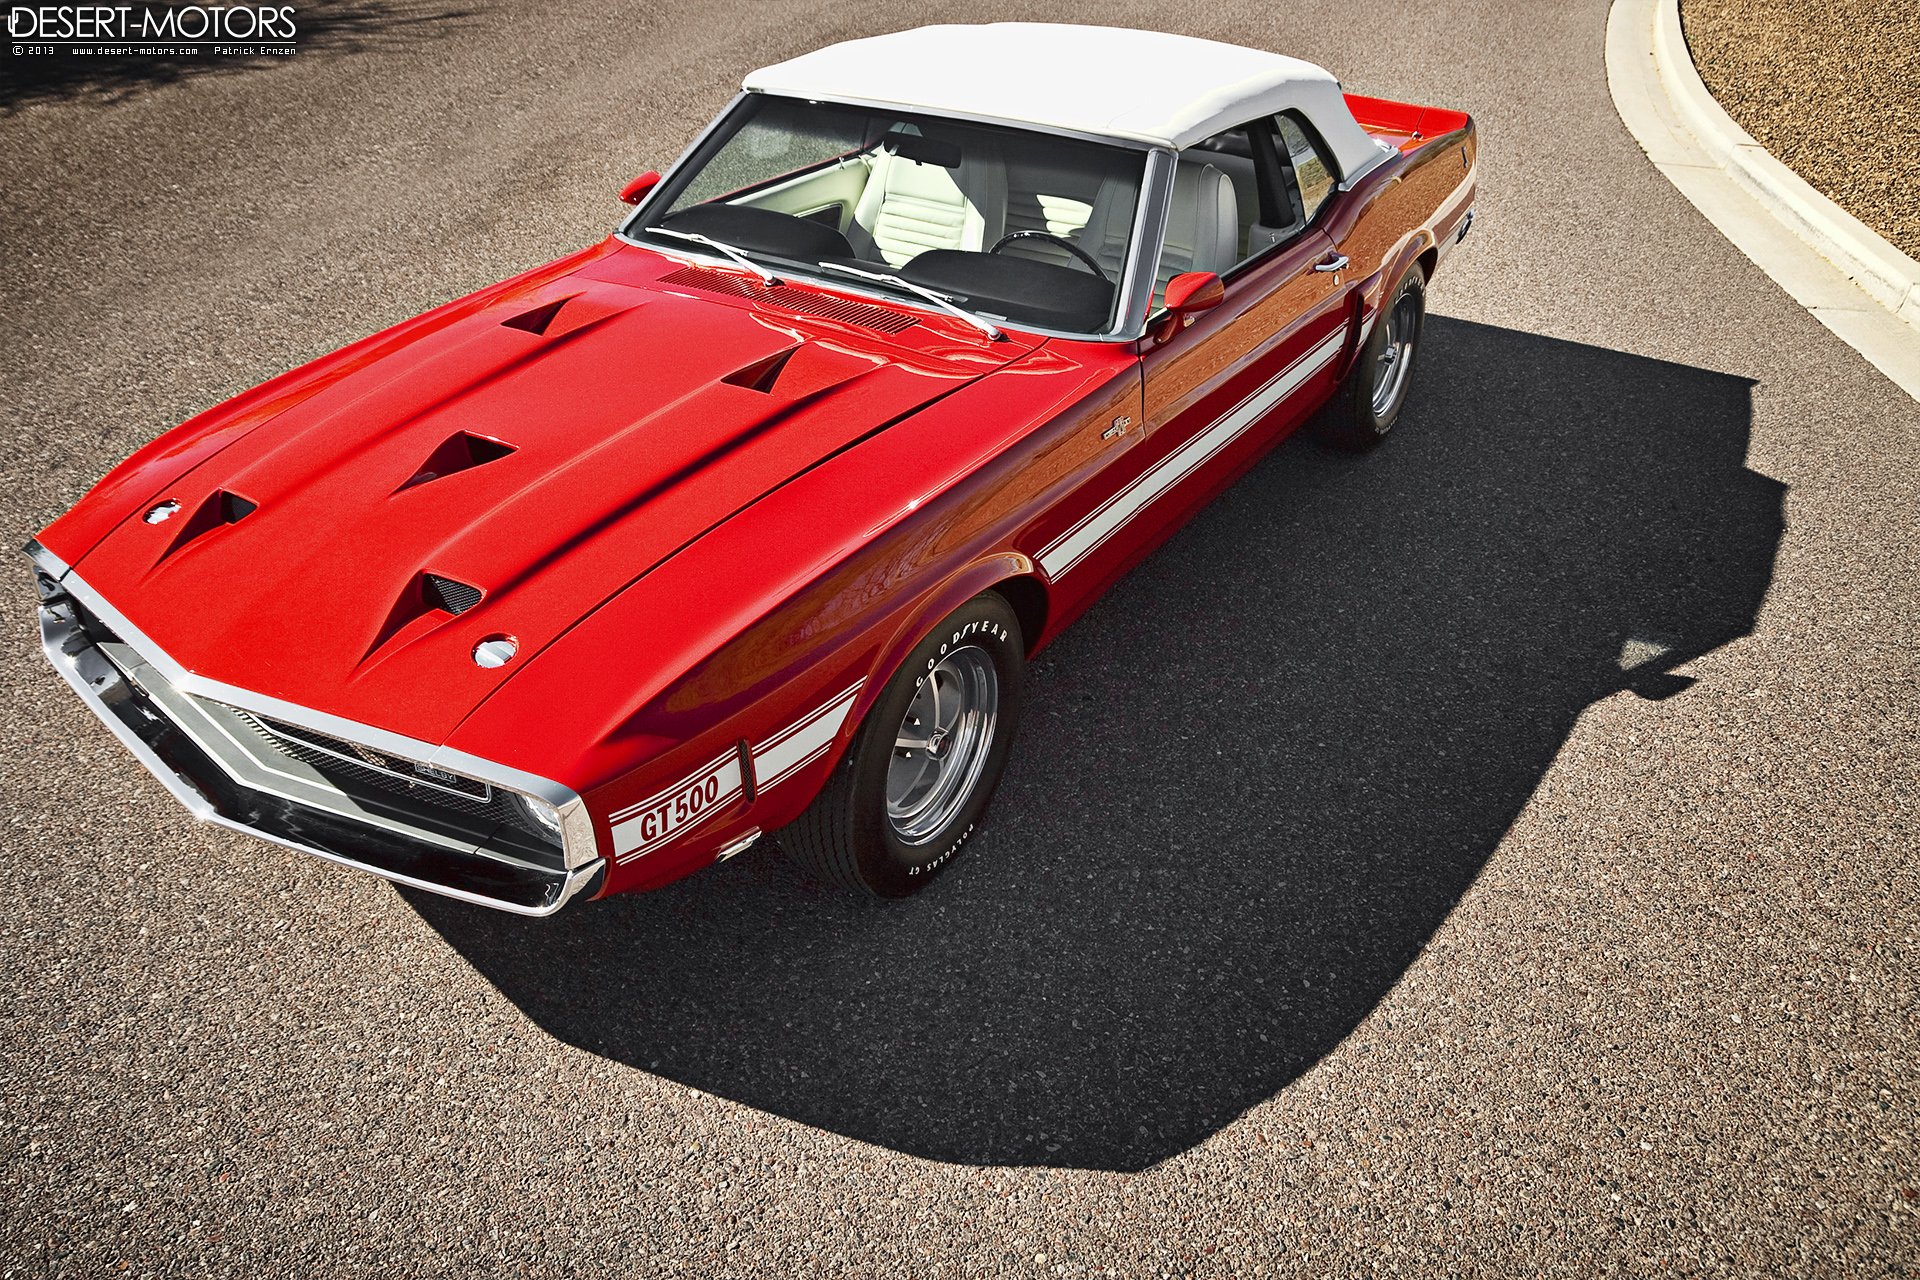 1969, Shelby, Gt500, Convertible, 428, Cobra, Jet, Ford, Mustang, Muscle, Classic Wallpaper